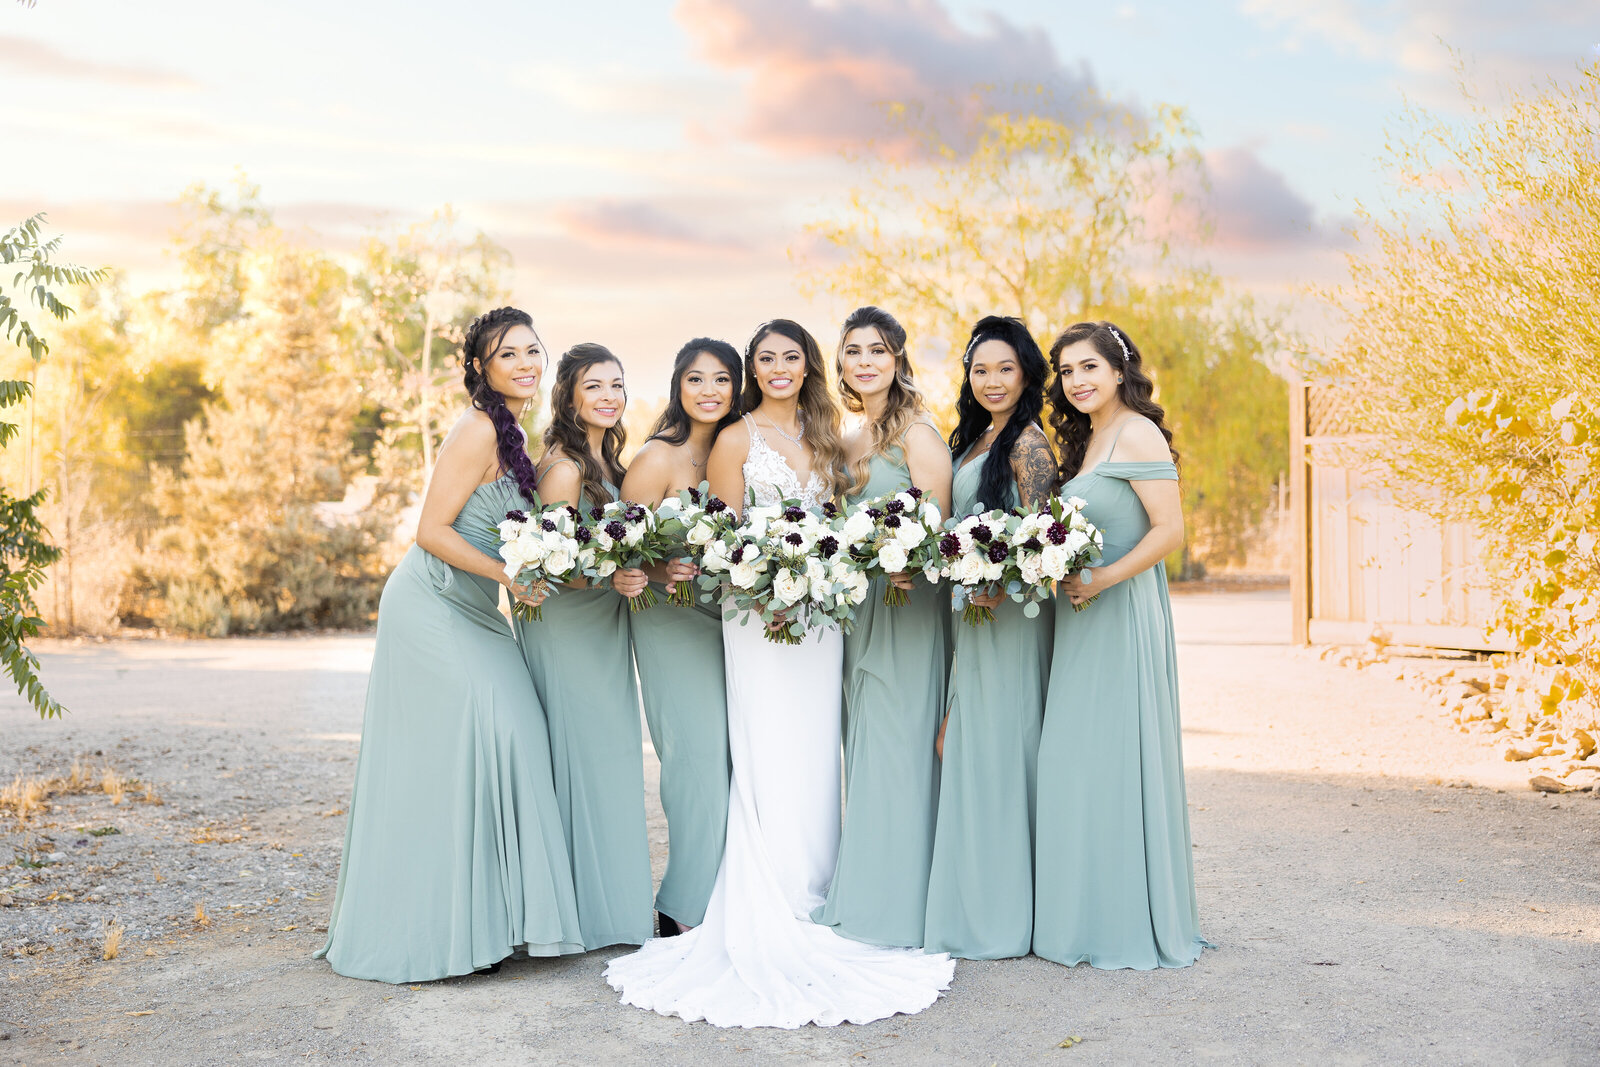 Bridesmaids wearing light green take a portrait together with bride in middle. Photo by wedding photographer in Sacramento, philippe studio pro.